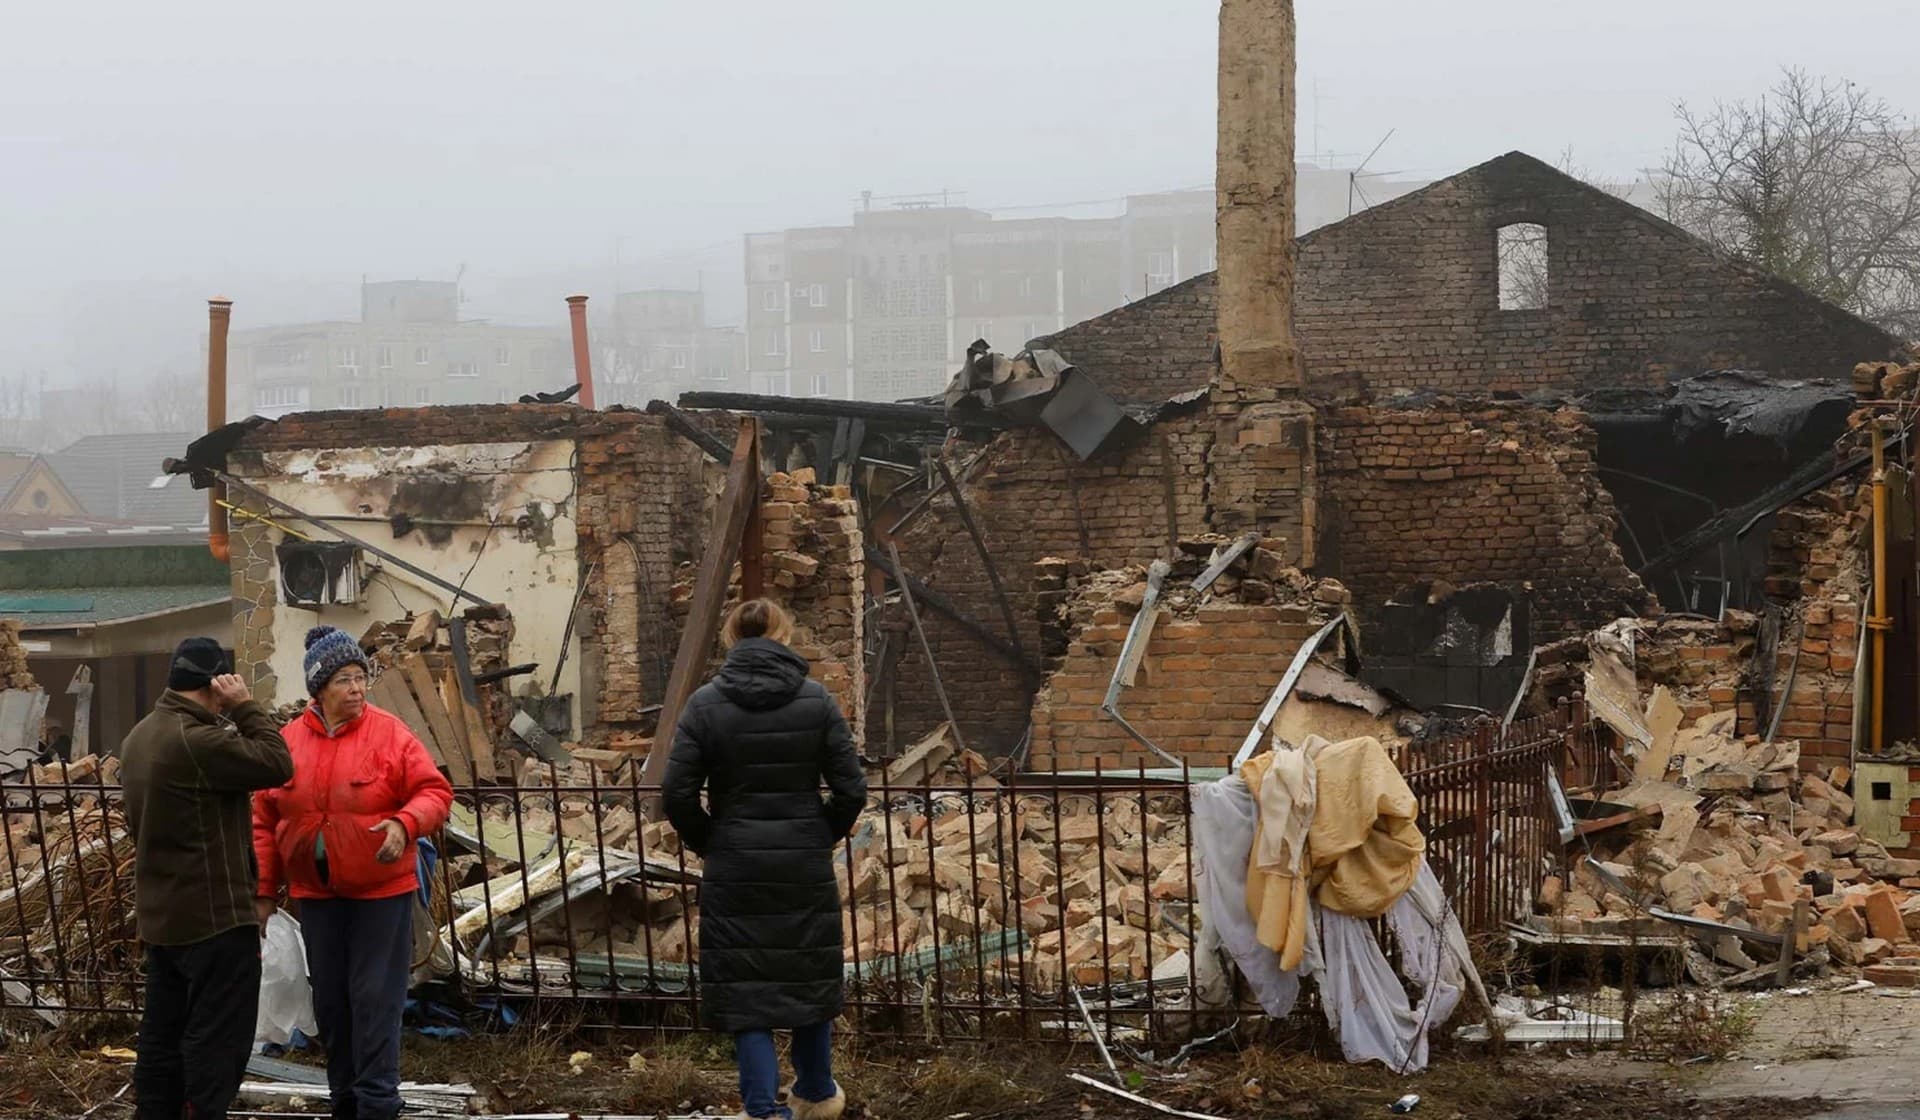 People gather near a residential building destroyed in recent shelling in Donetsk region